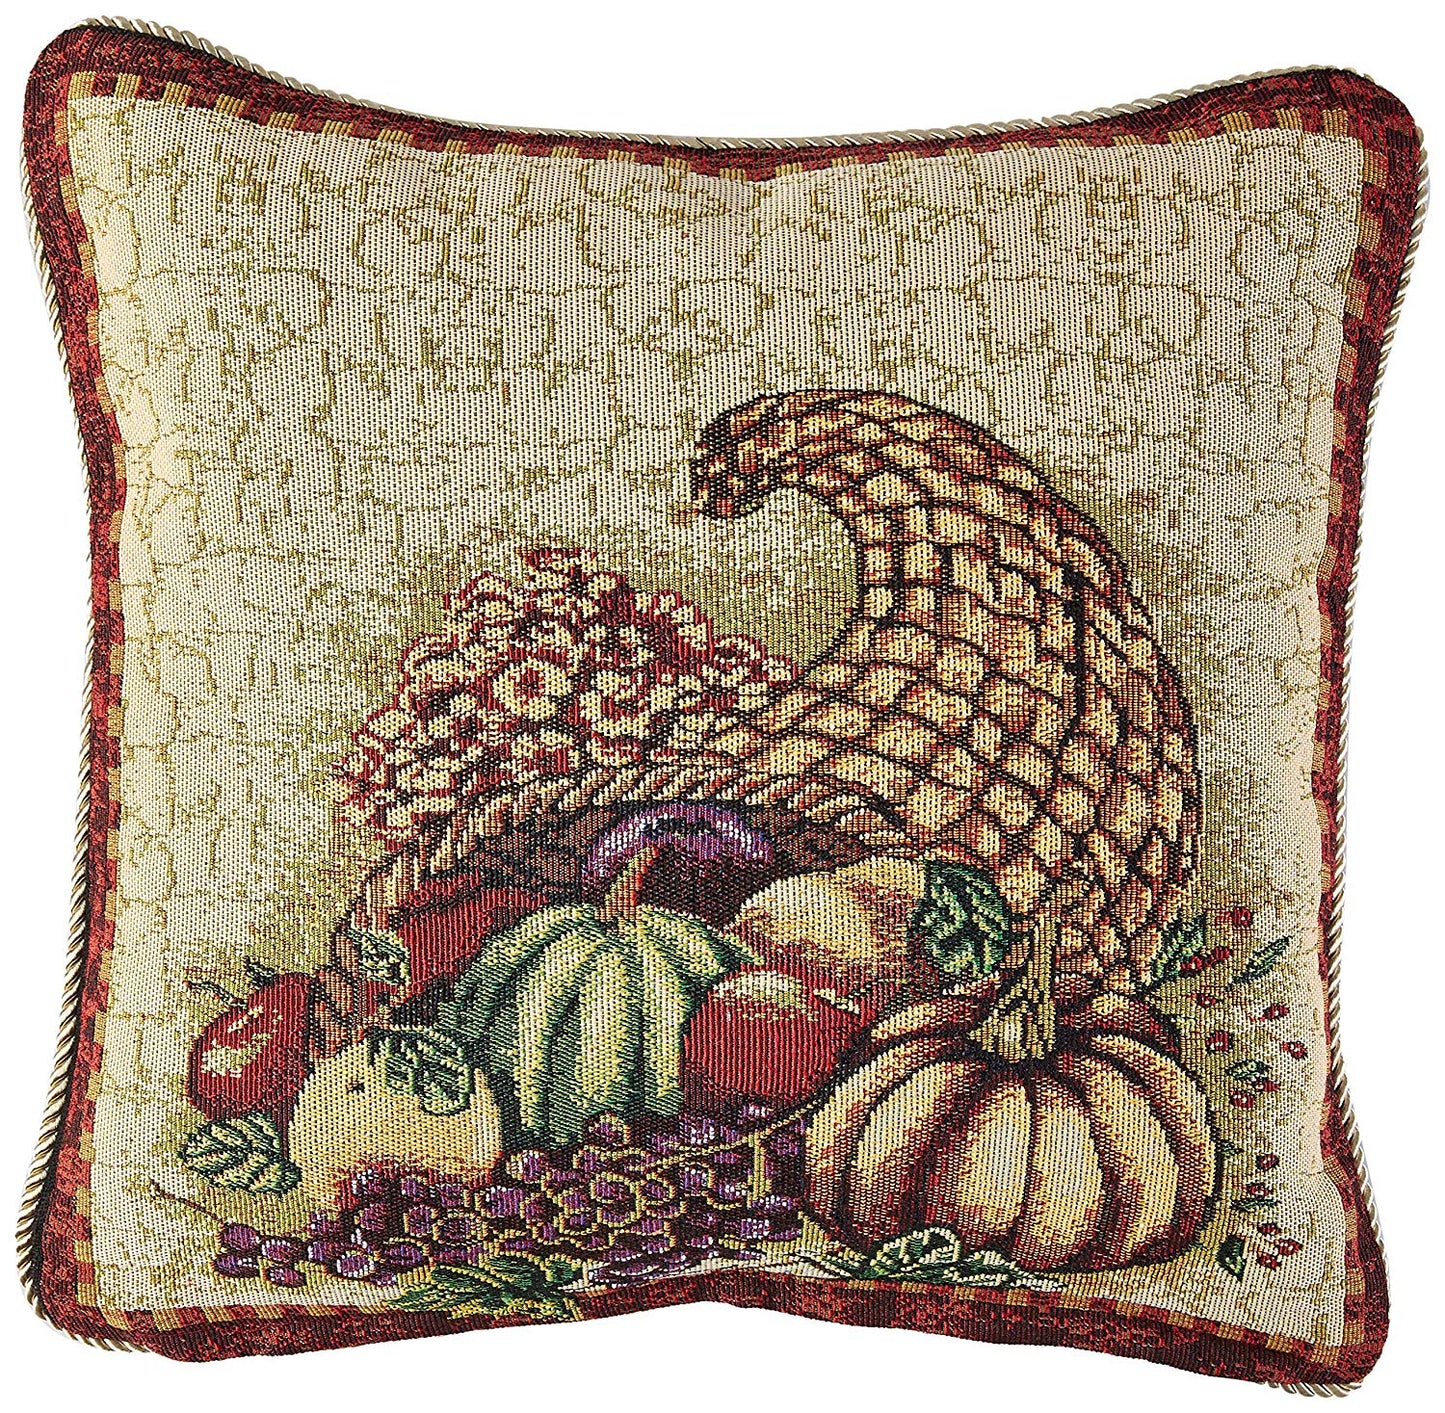 Fall Harvest Thanksgiving Autumn Leaves Sunflowers Fruits Pumpkins Tapestry Pattern Decorative Accent Throw Pillow